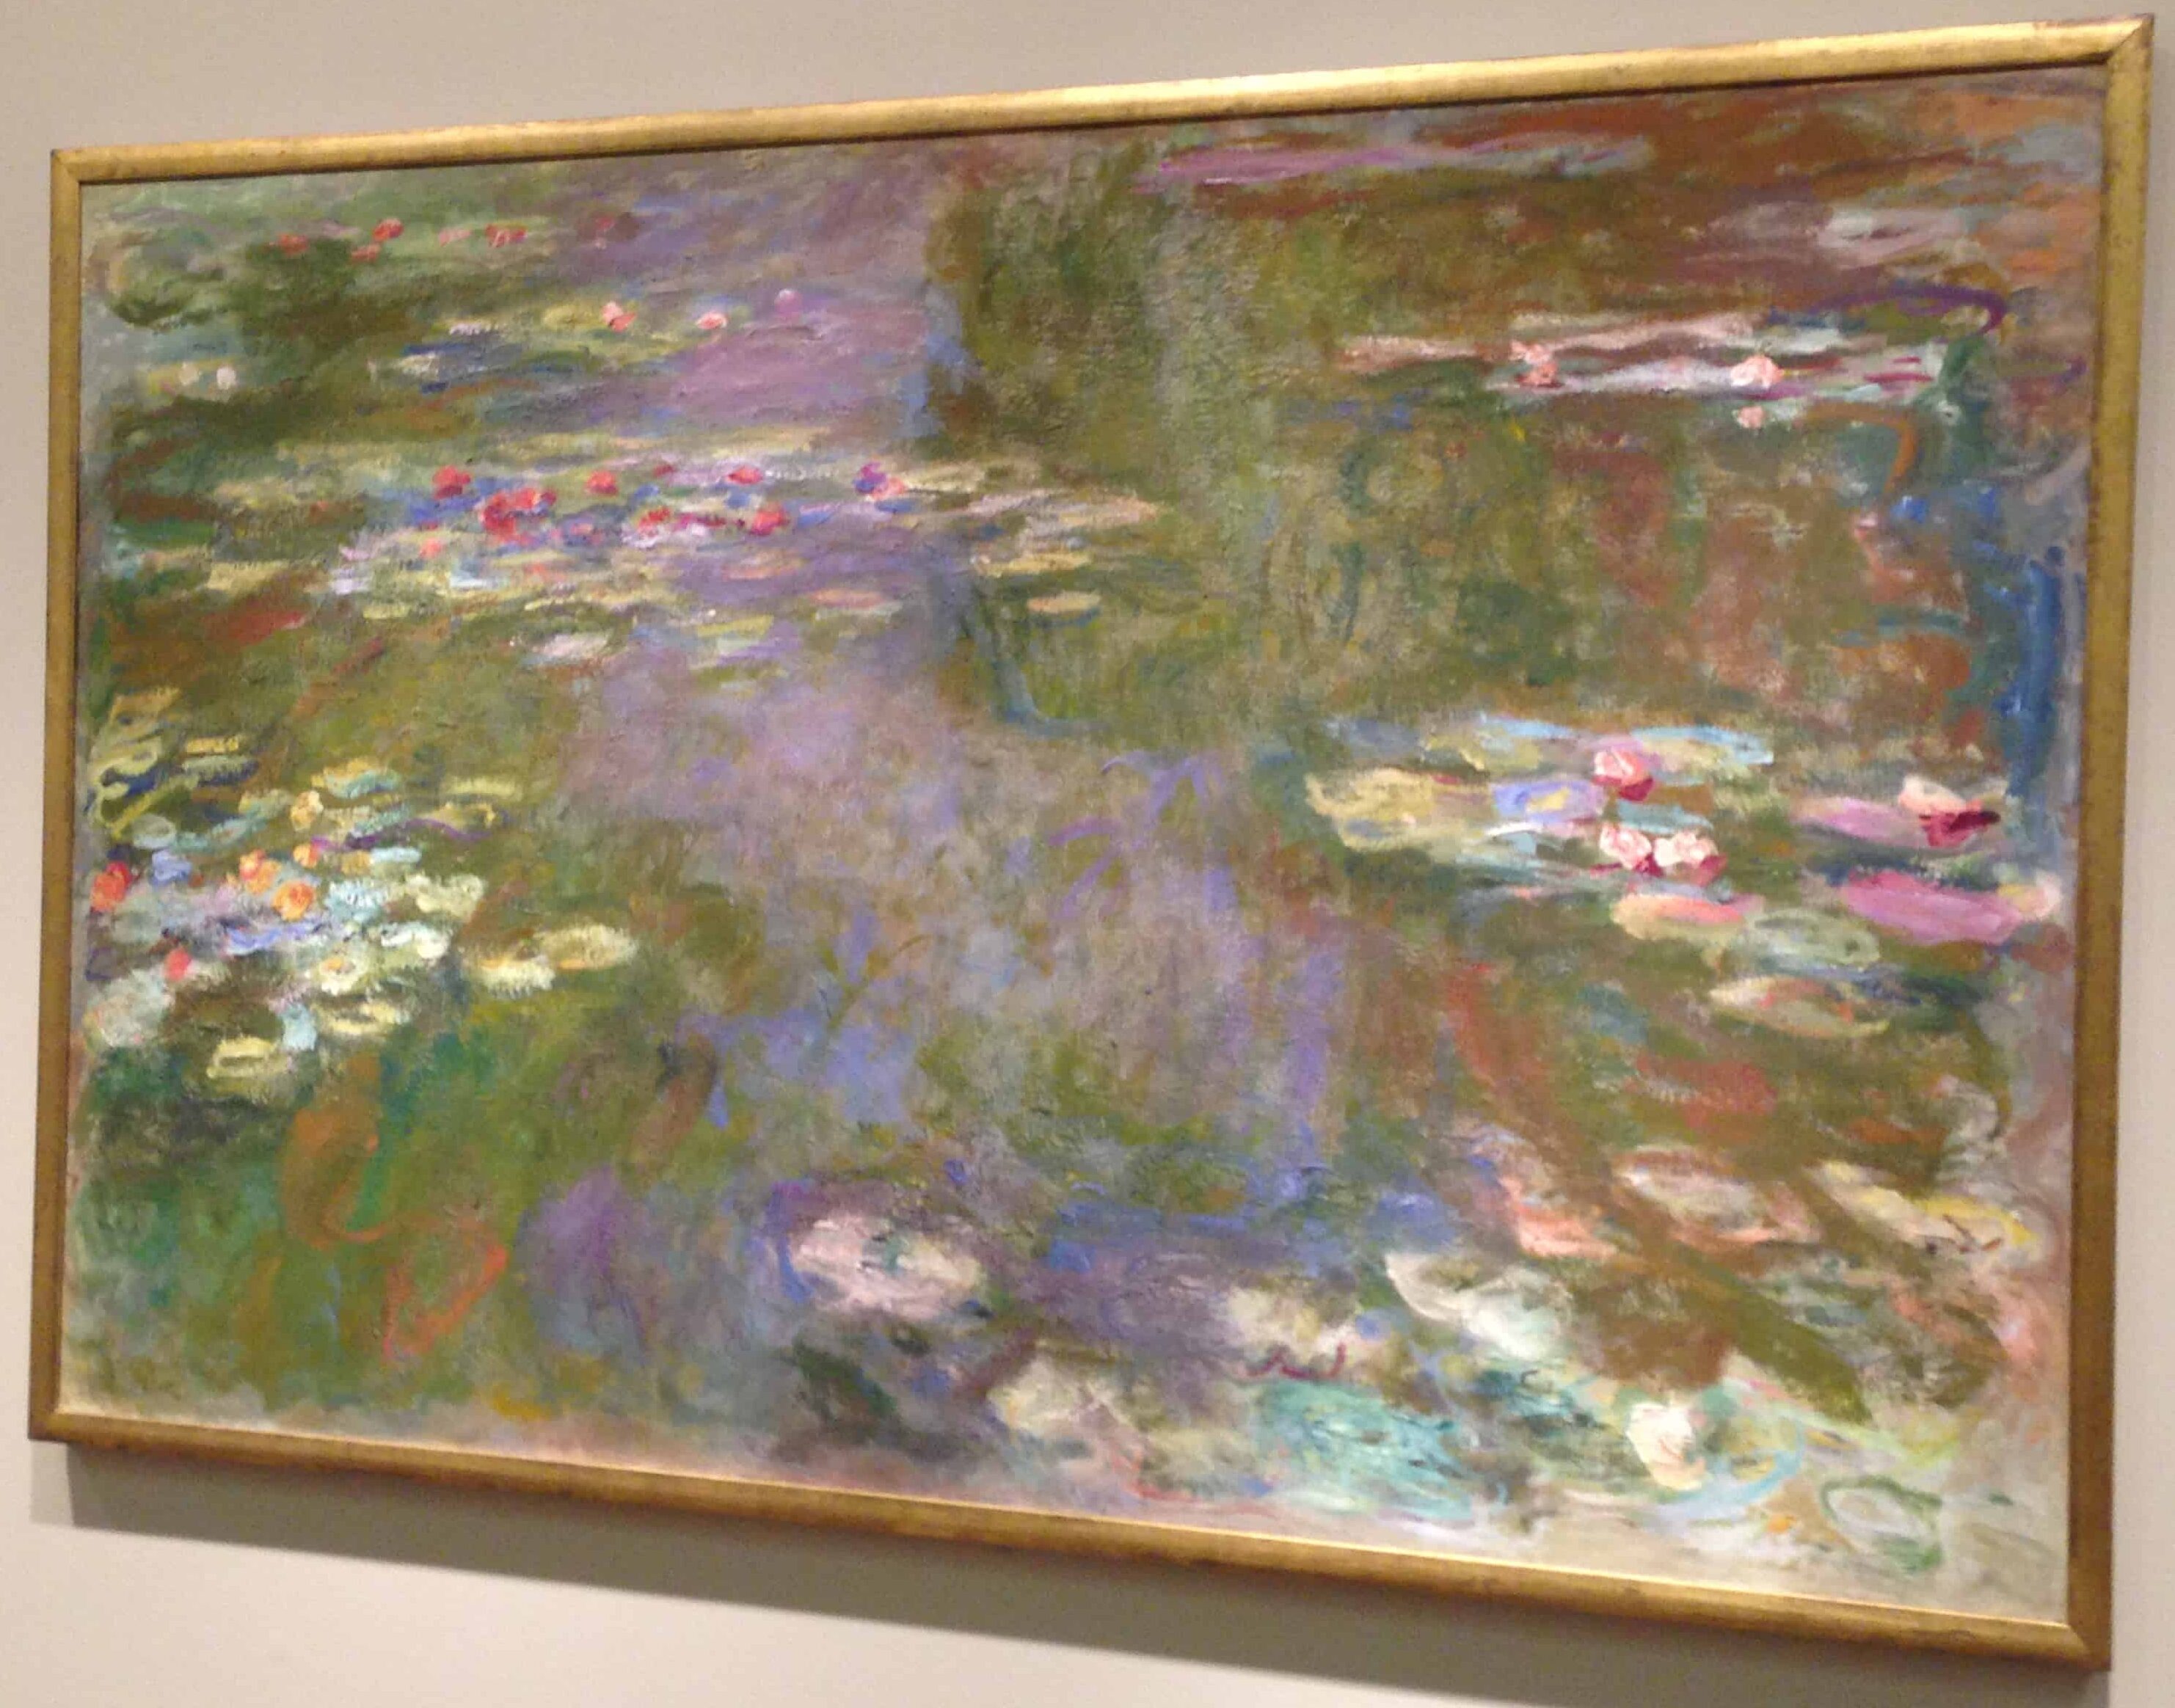 Water Lily Pond by Claude Monet (1917/19) at the Art Institute of Chicago